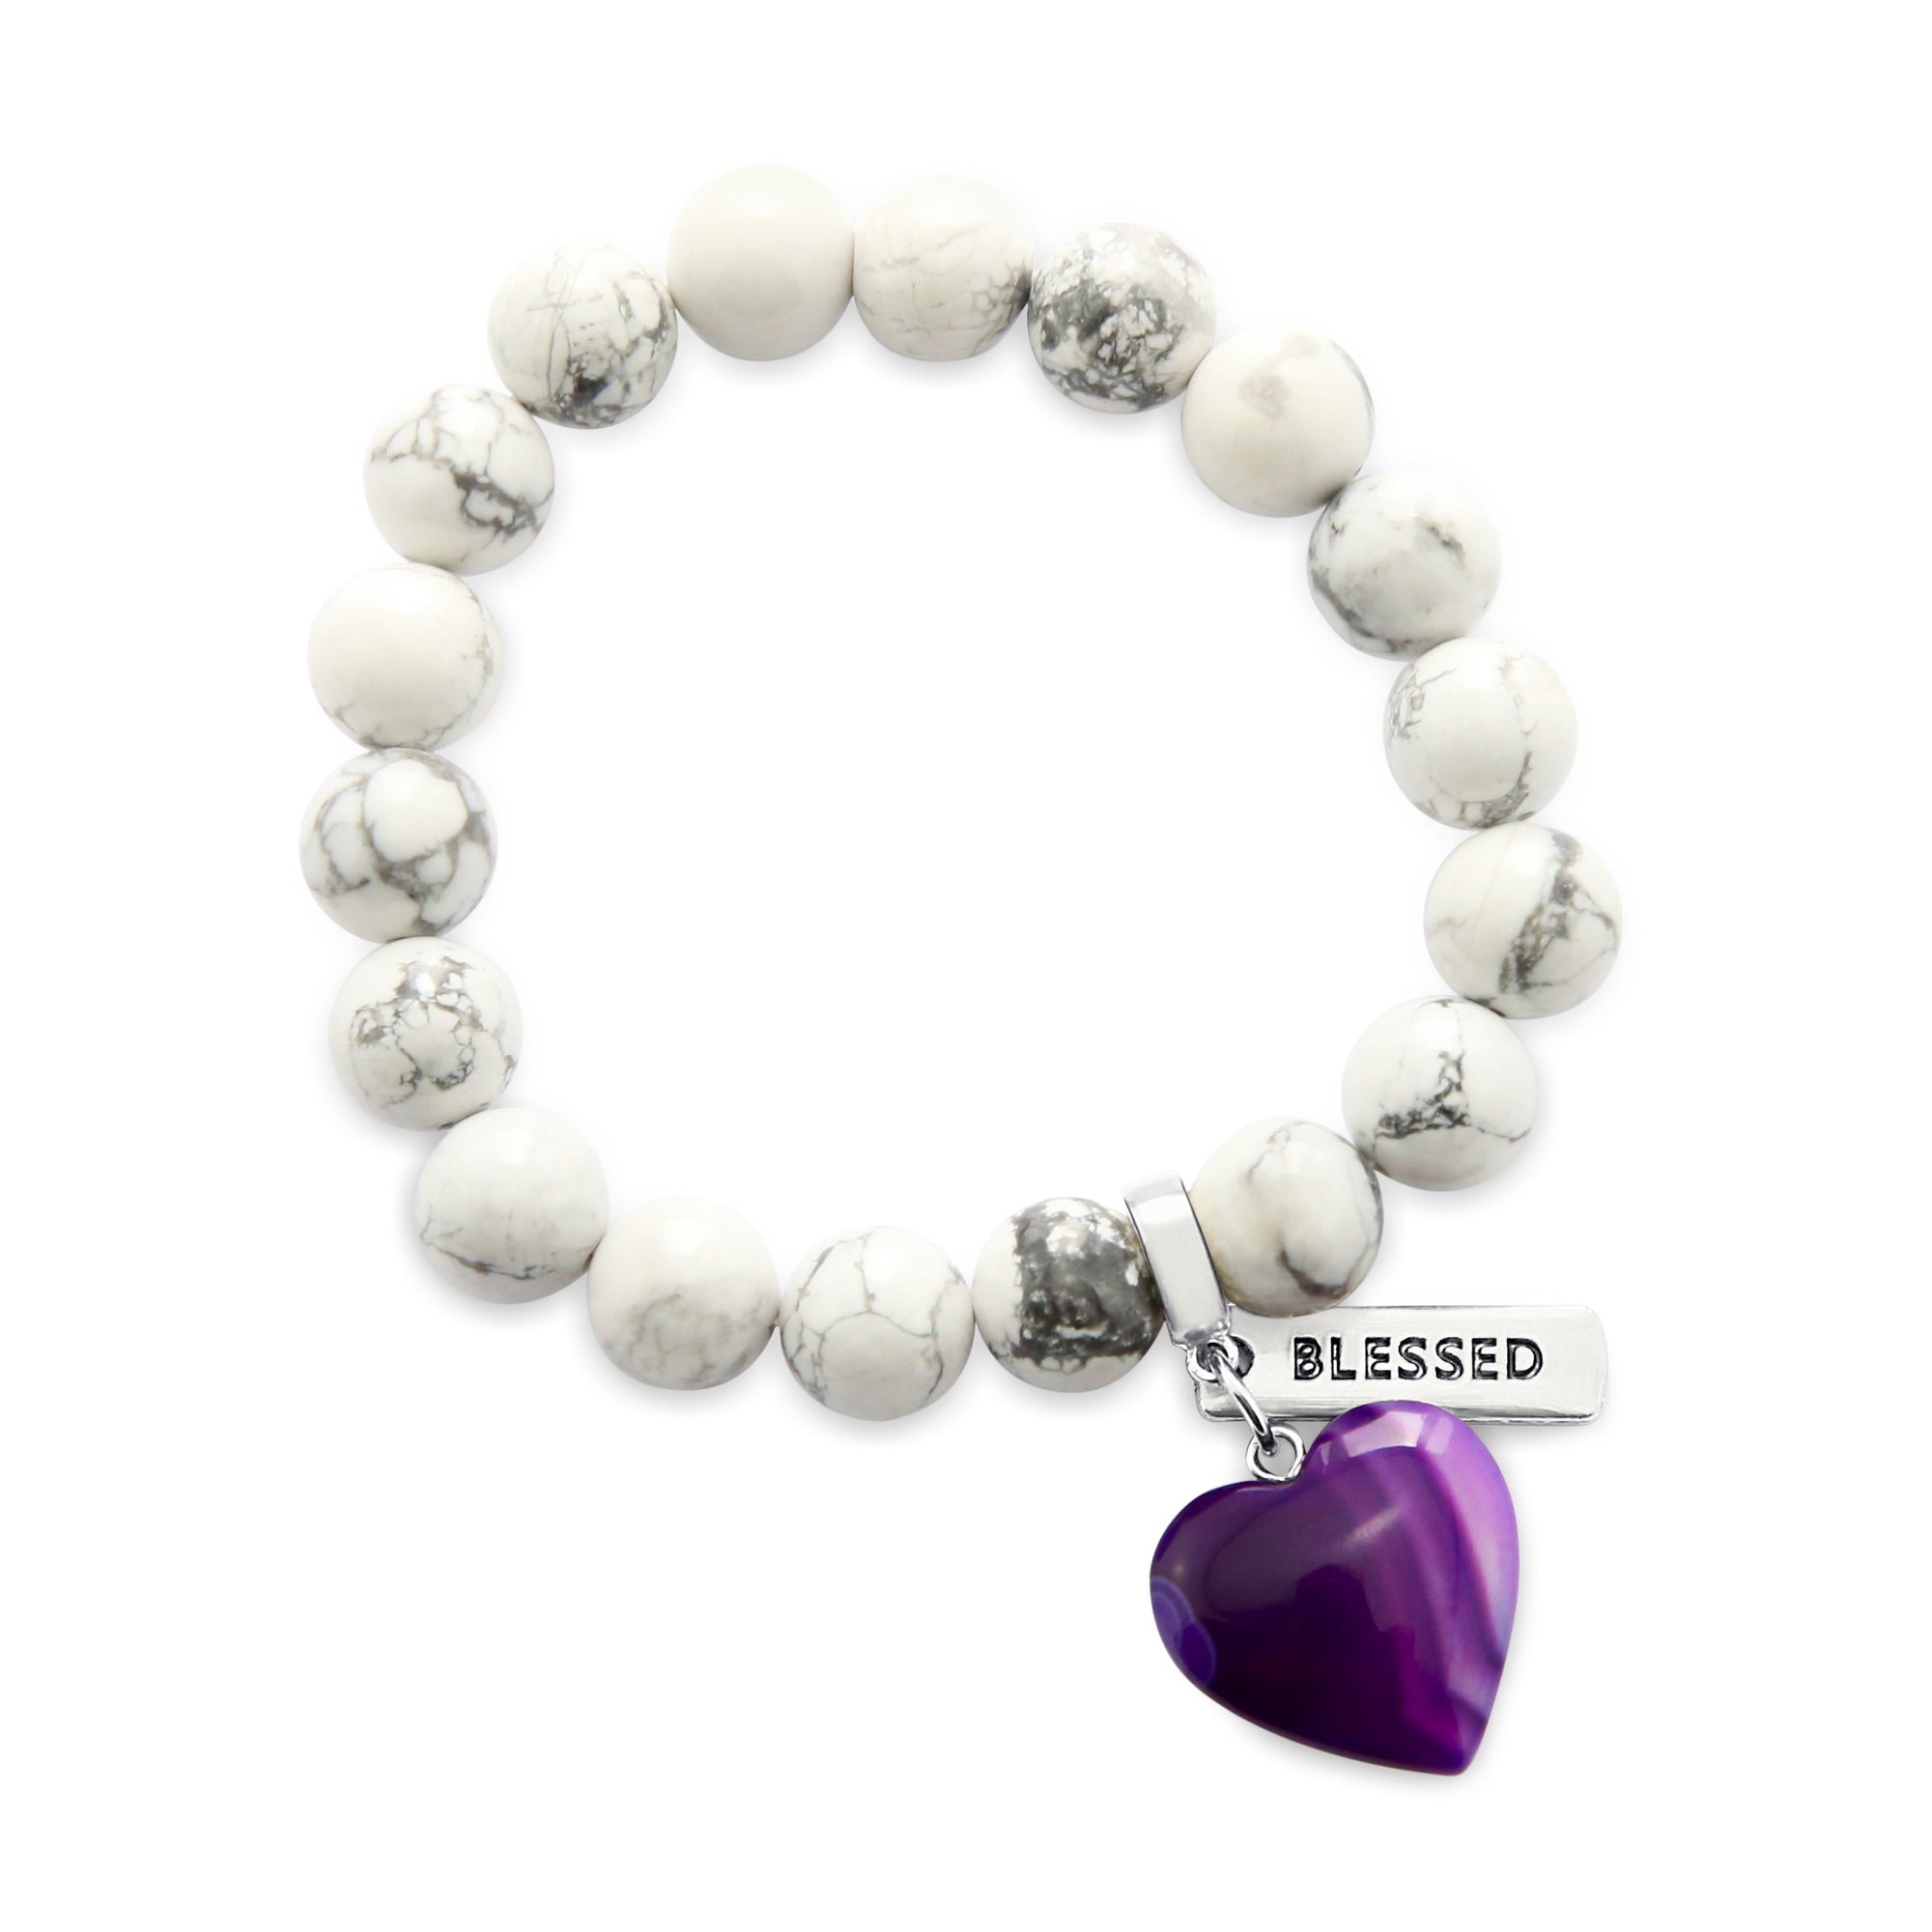 SWEETHEART Bracelet - 10mm WHITE MARBLE with Purple Striped Agate heart charm & Word Charm